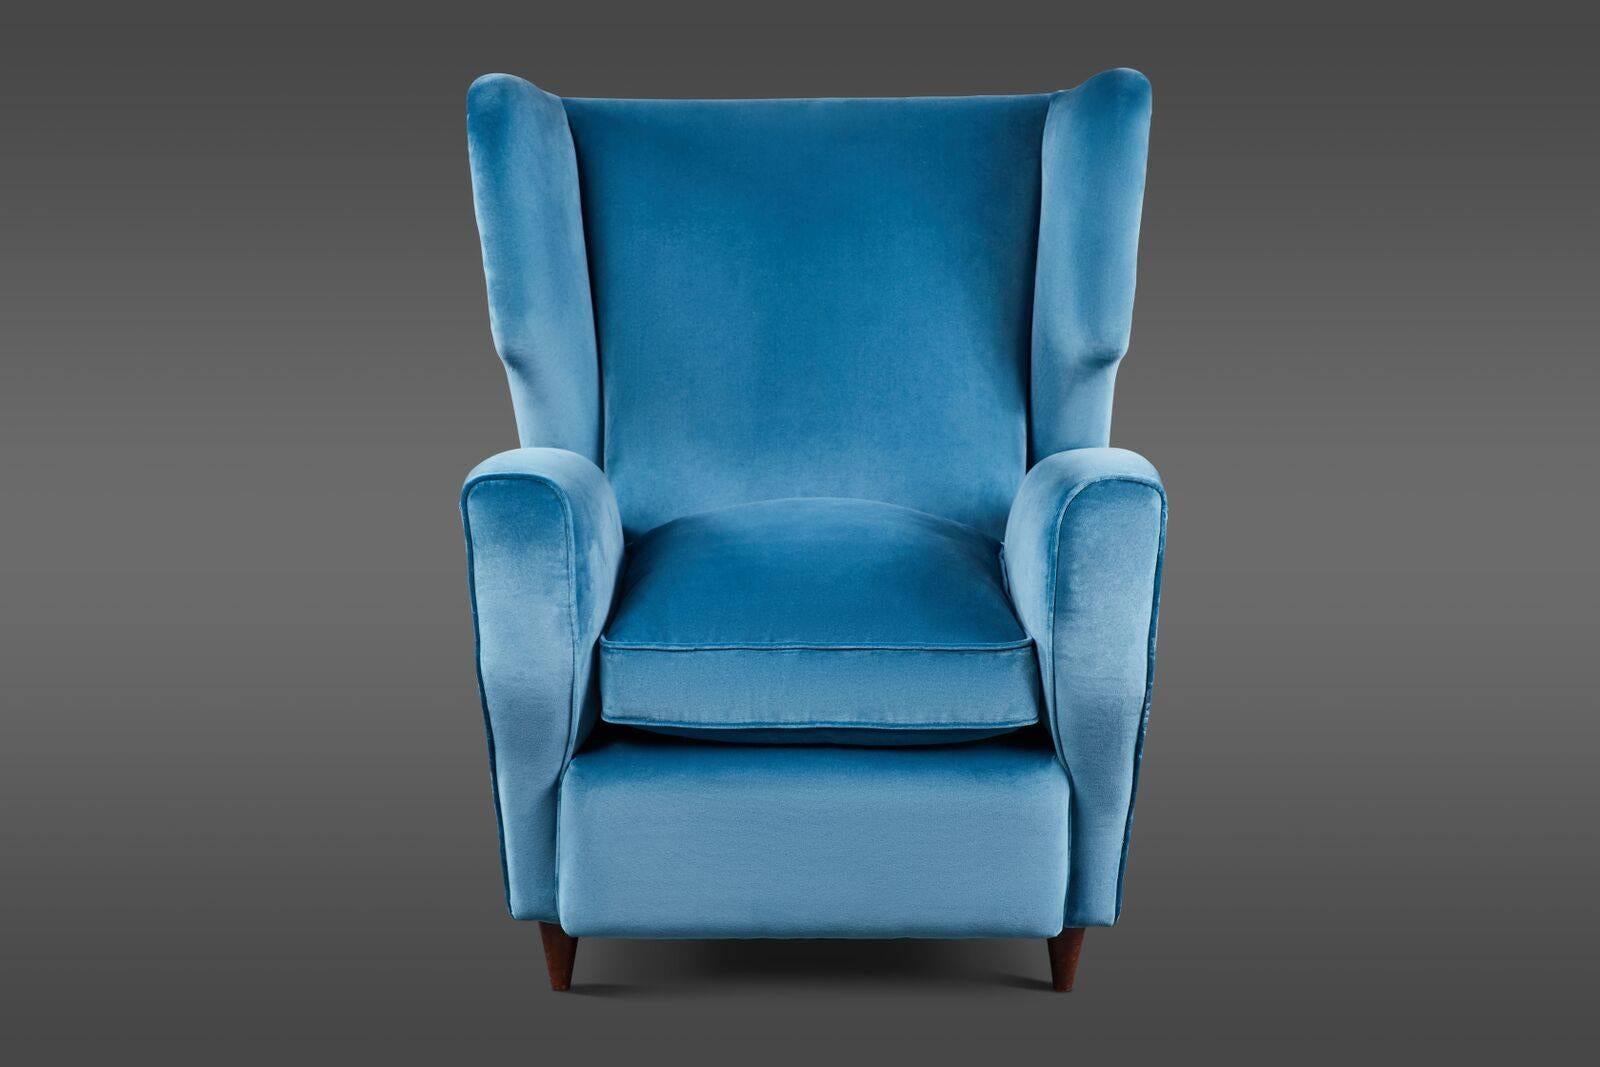 A curvaceous pair of Italian mid-20th century wingback armchairs in two tones of blue velvet with loose, overstuffed down and feather seat cushions.